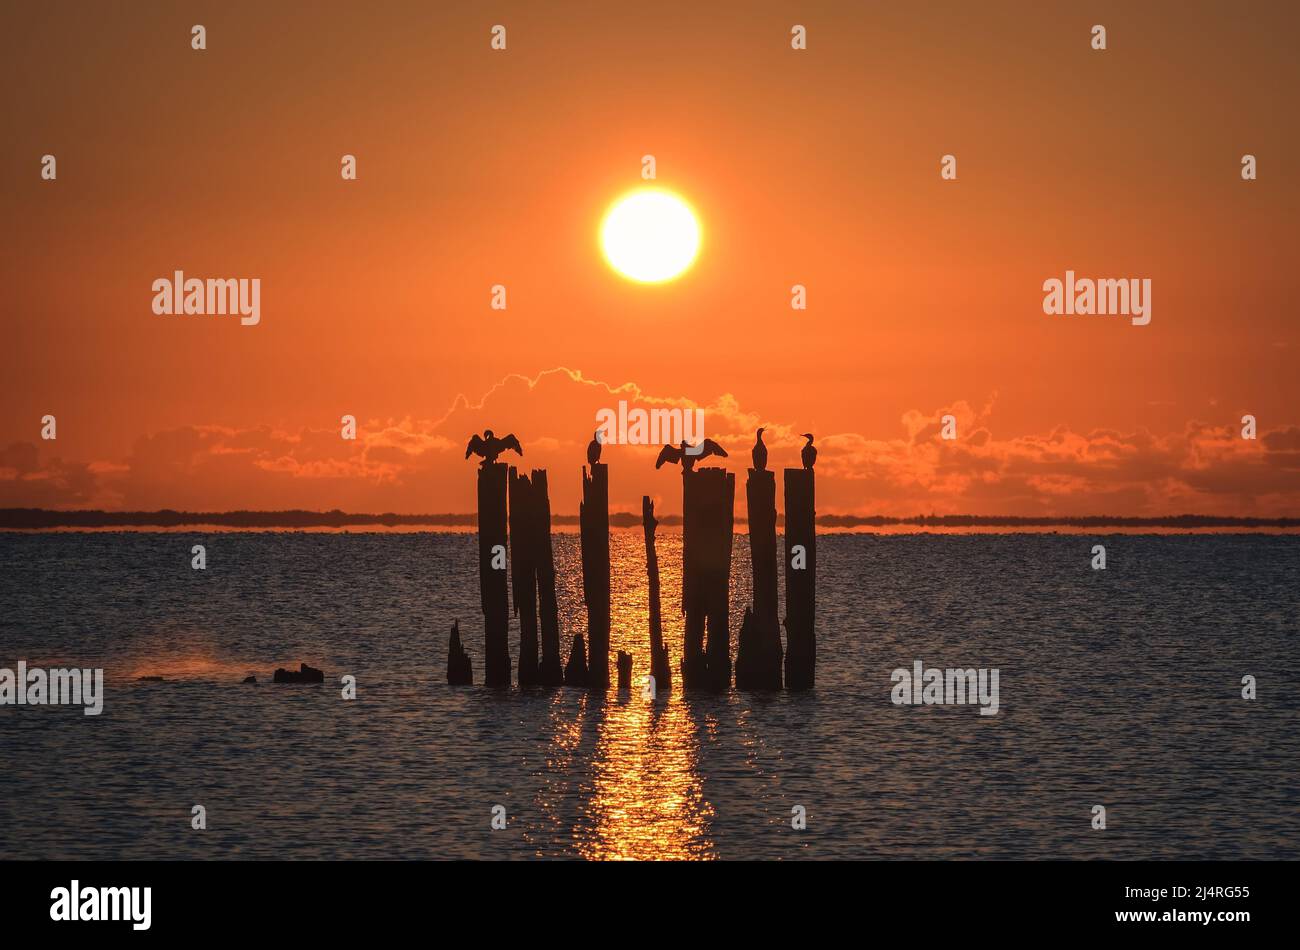 Beautiful evening seaside view. Wooden boles at the Polish seaside with the evening sun in the background. Stock Photo